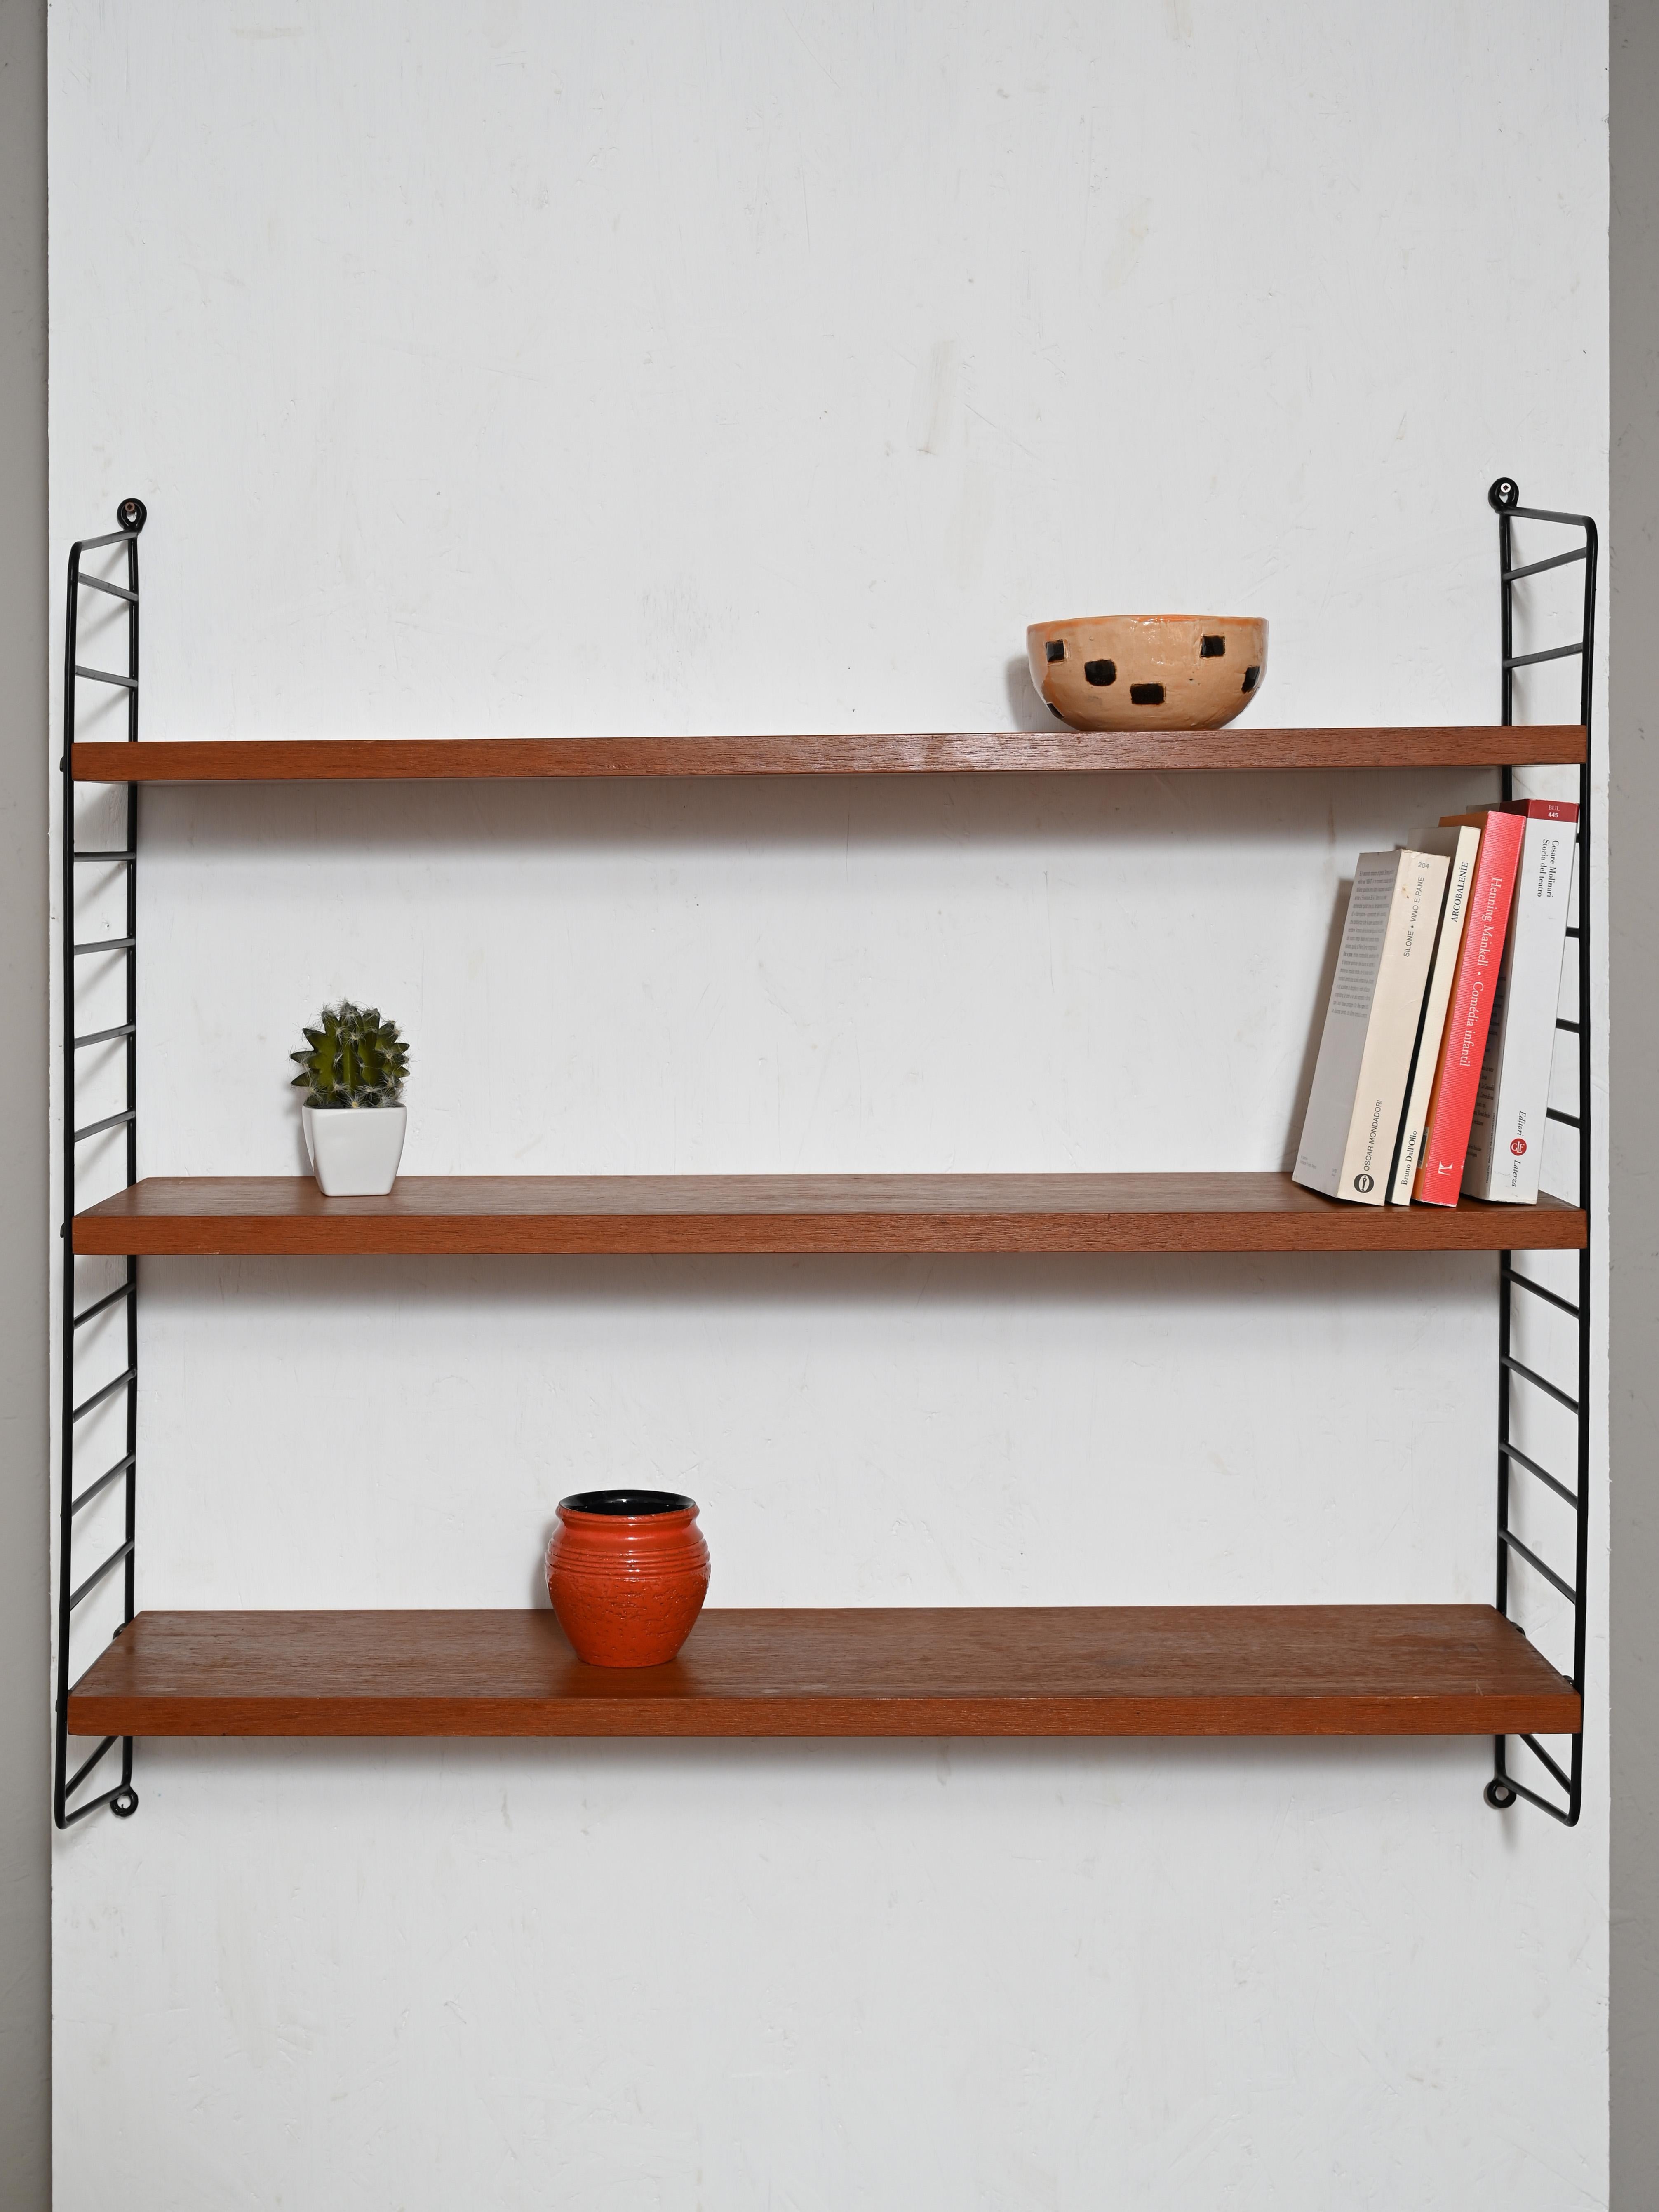 Wall shelving system with stamp of authenticity.
Composed of three teak wood shelving units with adjustable height and two side supports made of
black plastic-coated metal.
Use as a bookcase in the living room or as storage in the kitchen,